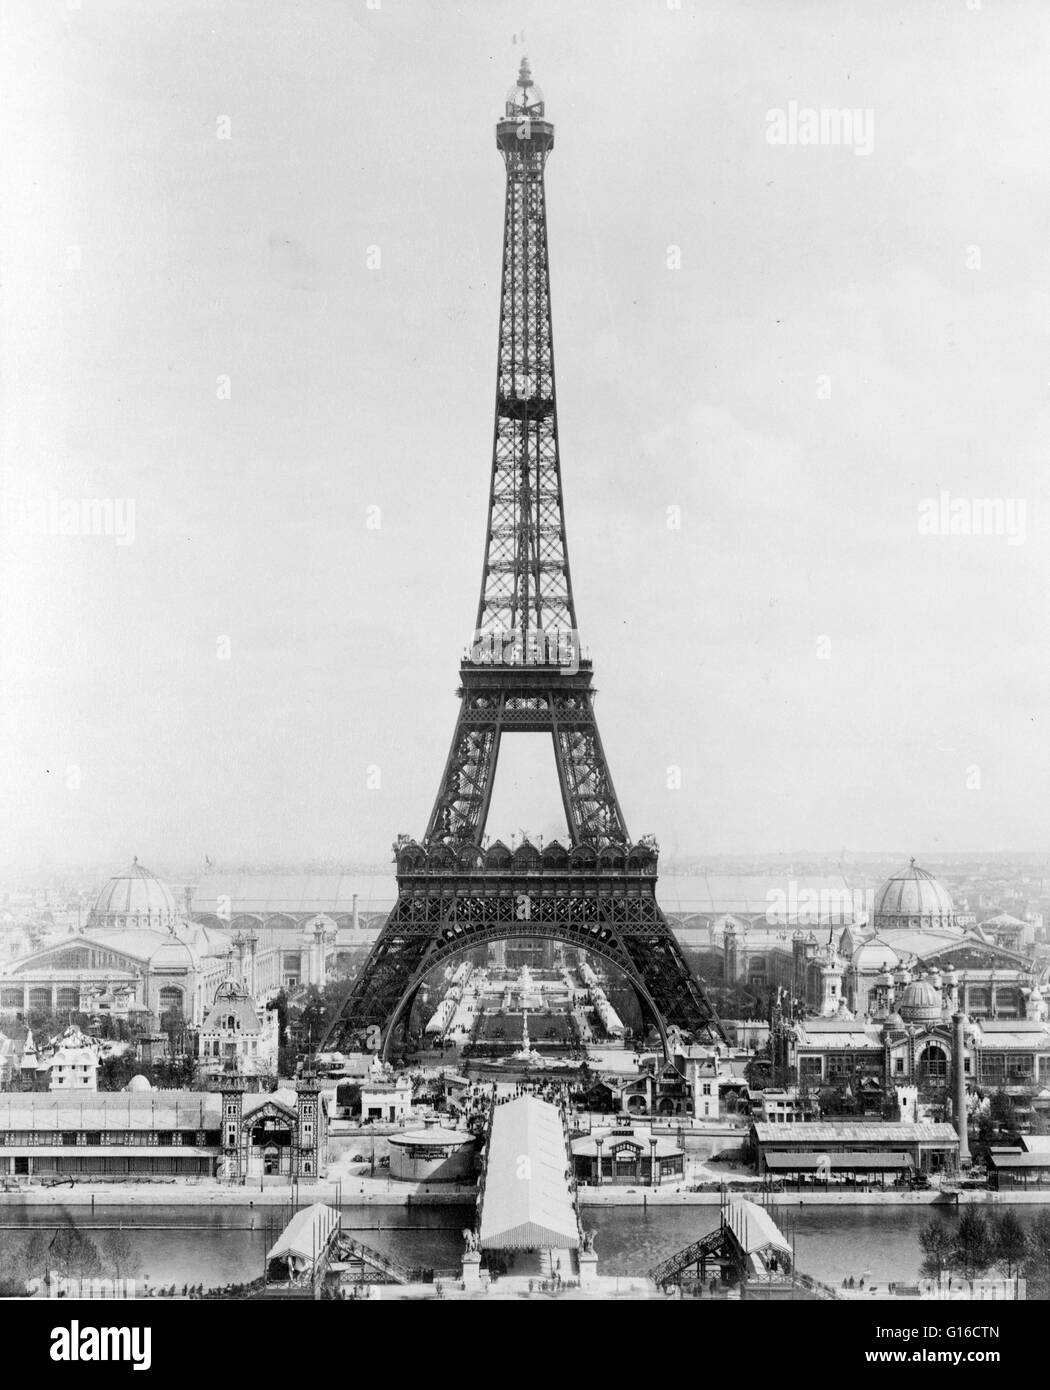 Eiffel Tower and exhibition buildings on the Champ de Mars as seen from Trocadero, Paris Exposition, 1889. The Eiffel Tower (La Tour Eiffel) is an iron lattice tower located on the Champ de Mars in Paris. It was named after the engineer Gustave Eiffel, wh Stock Photo